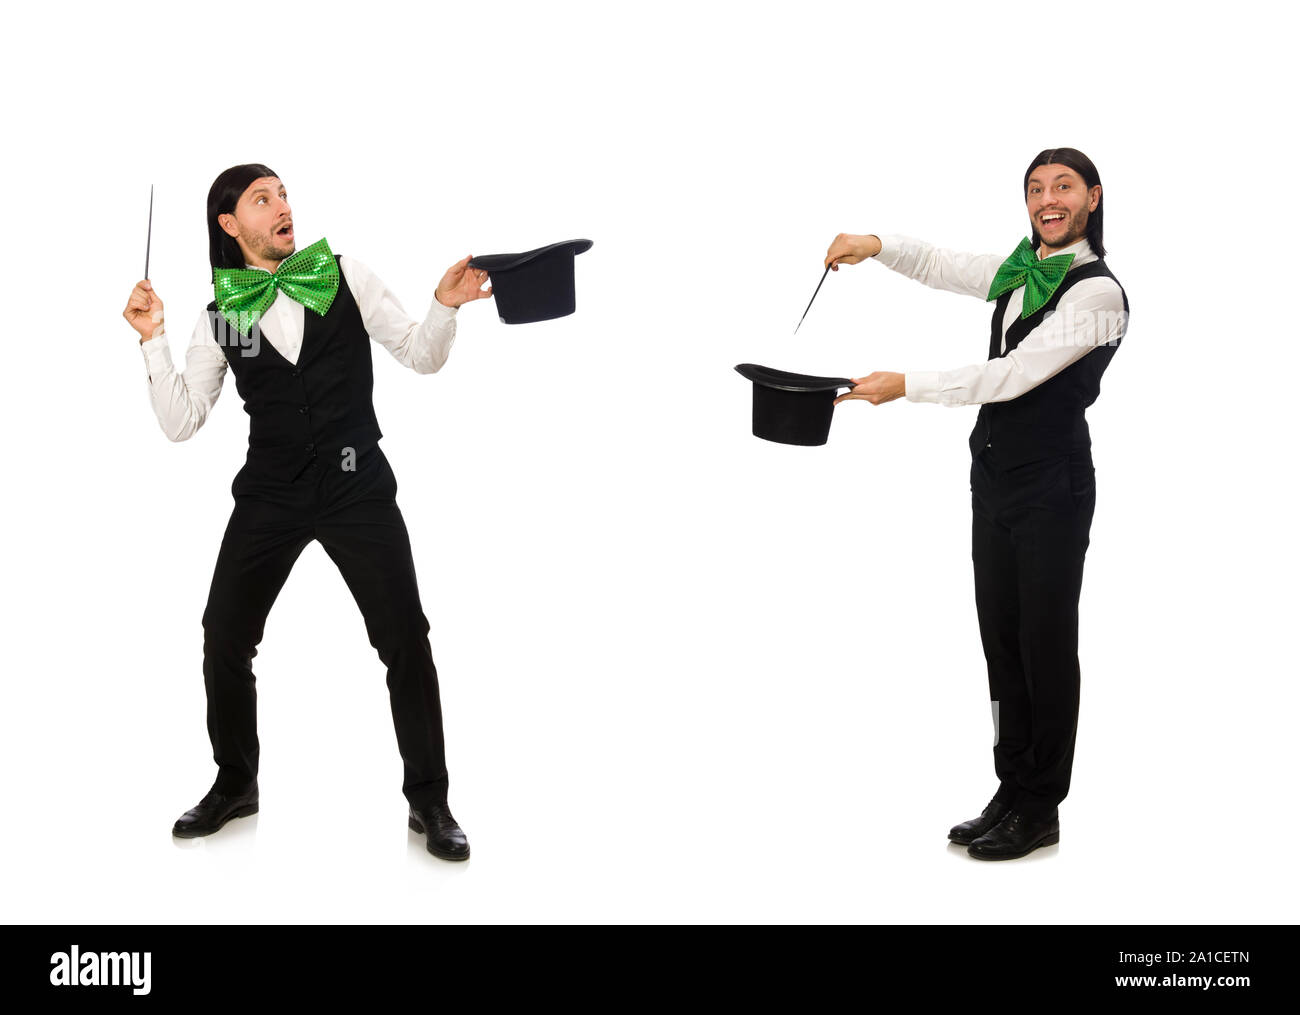 The man with big green bow tie in funny concept Stock Photo